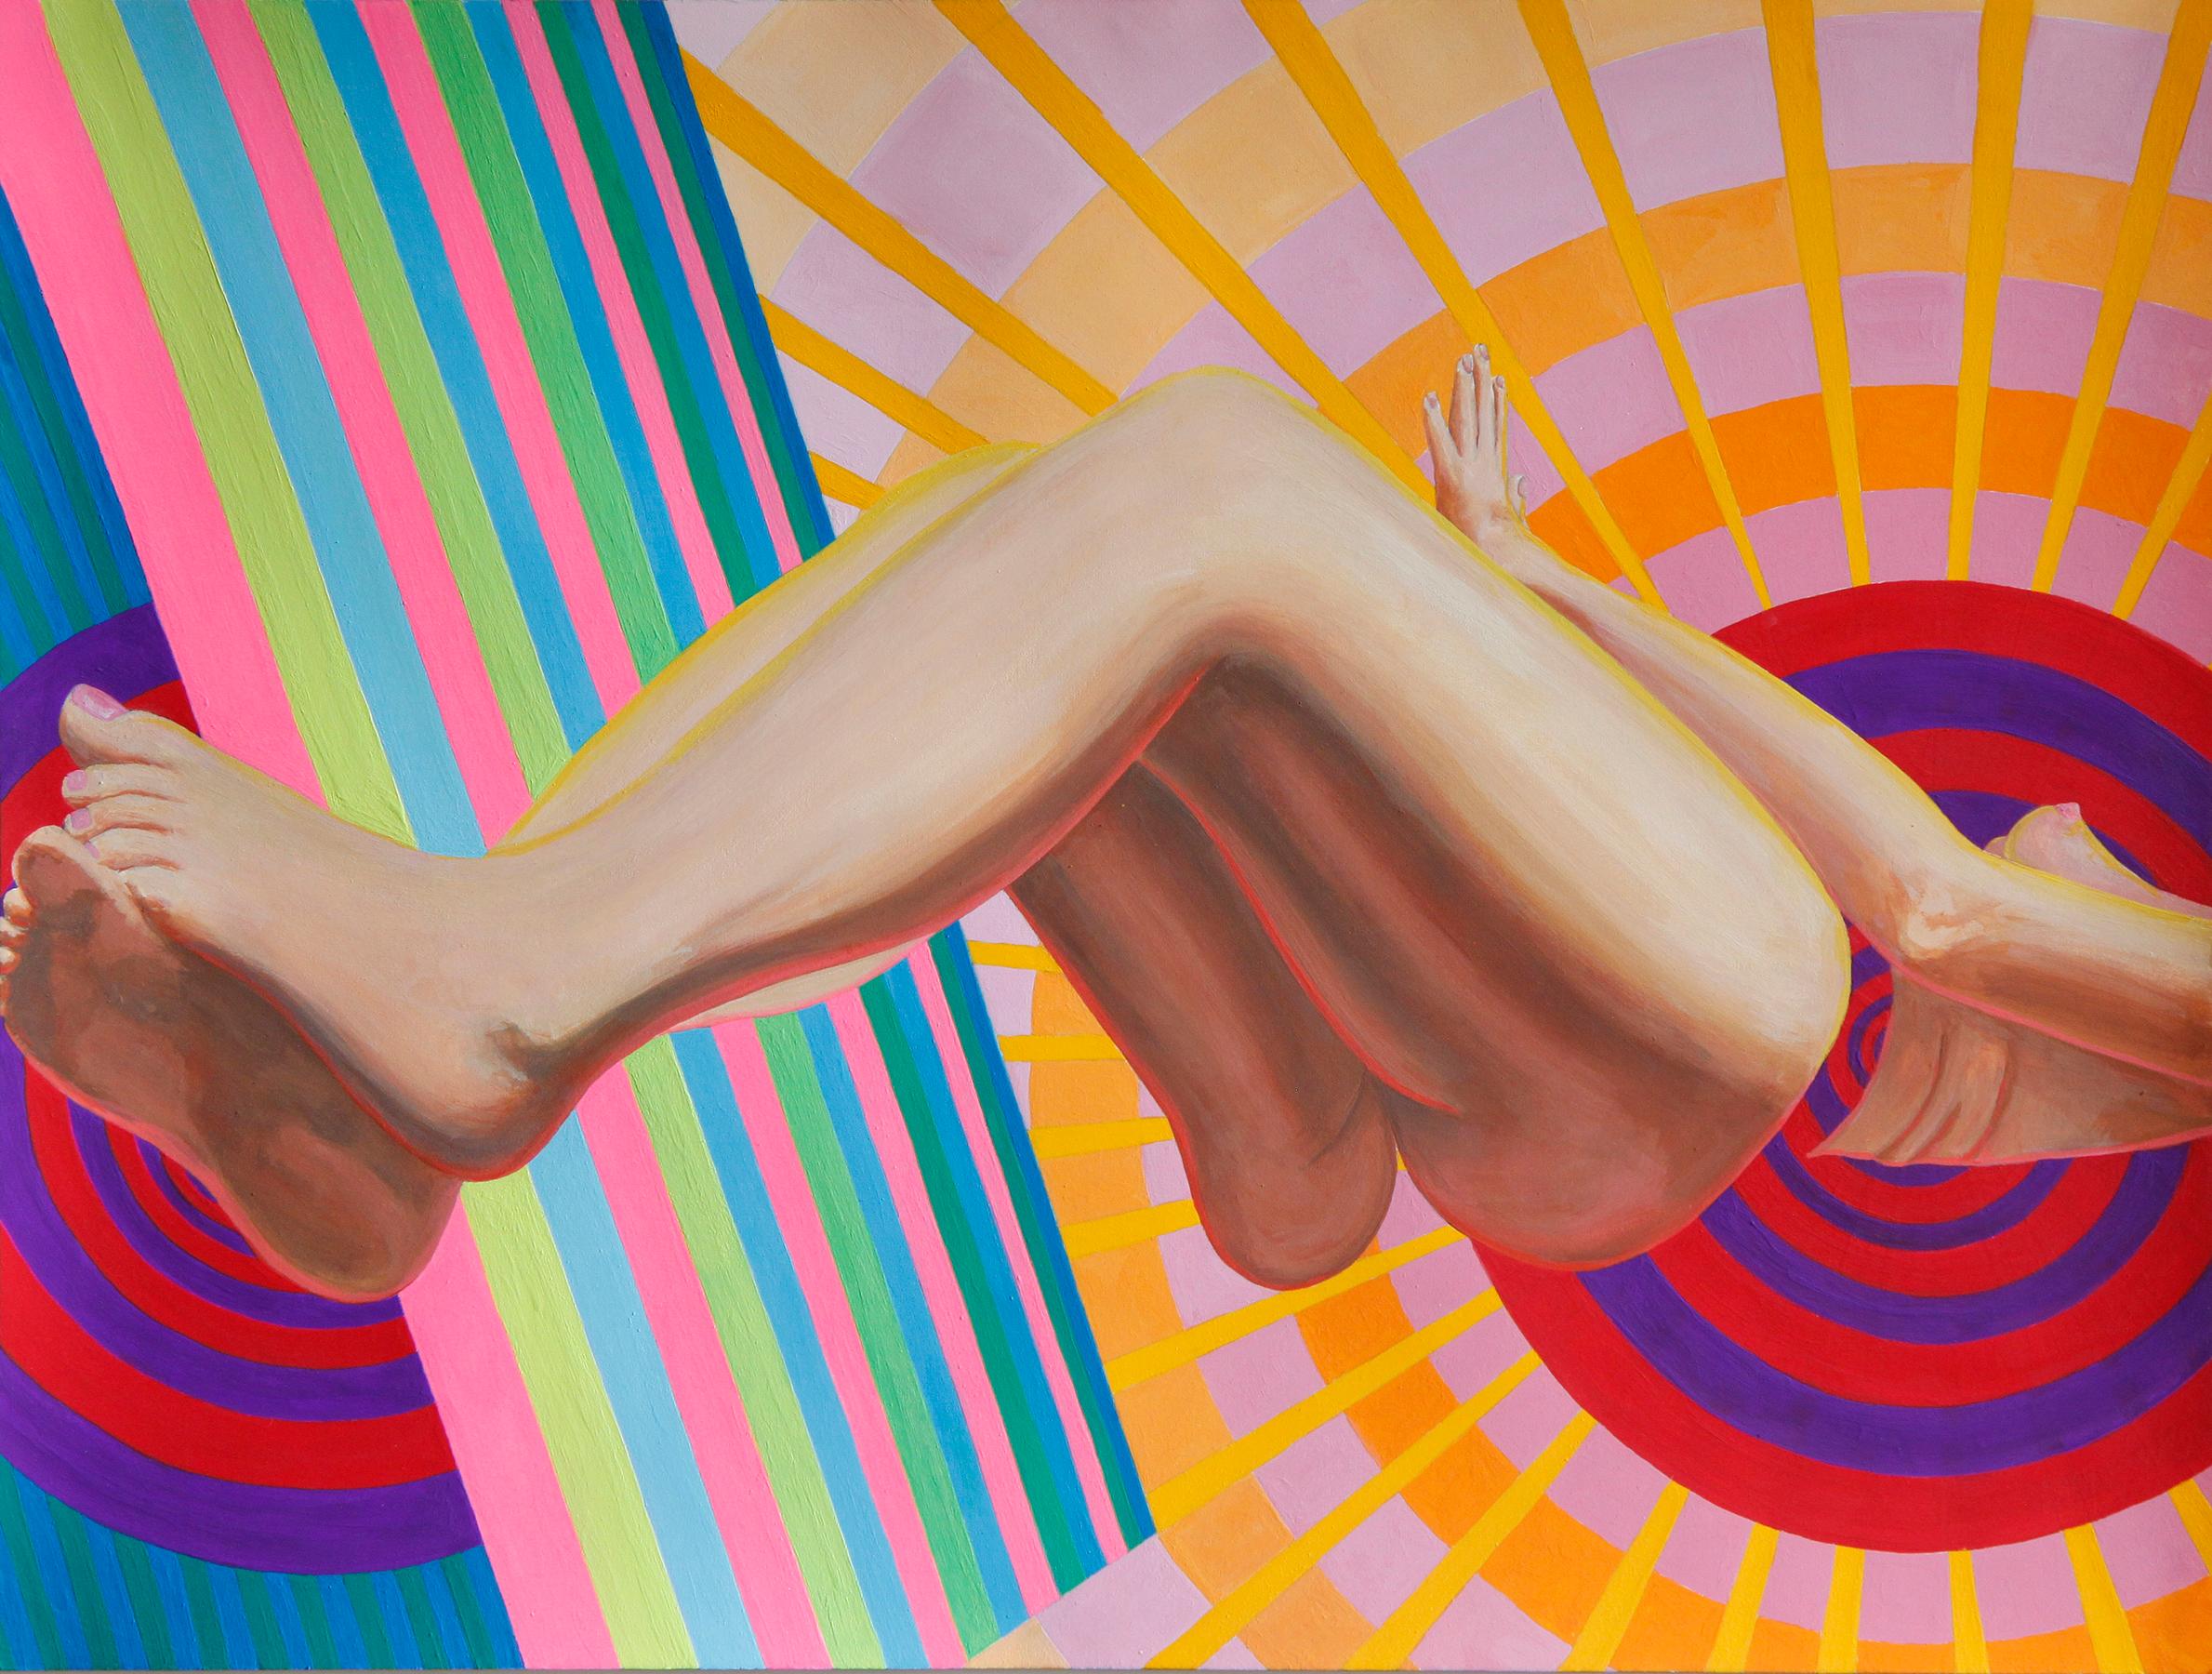 Emily Roz Abstract Painting - "Radiator" Optical Art Contemporary Painting with Female Figure